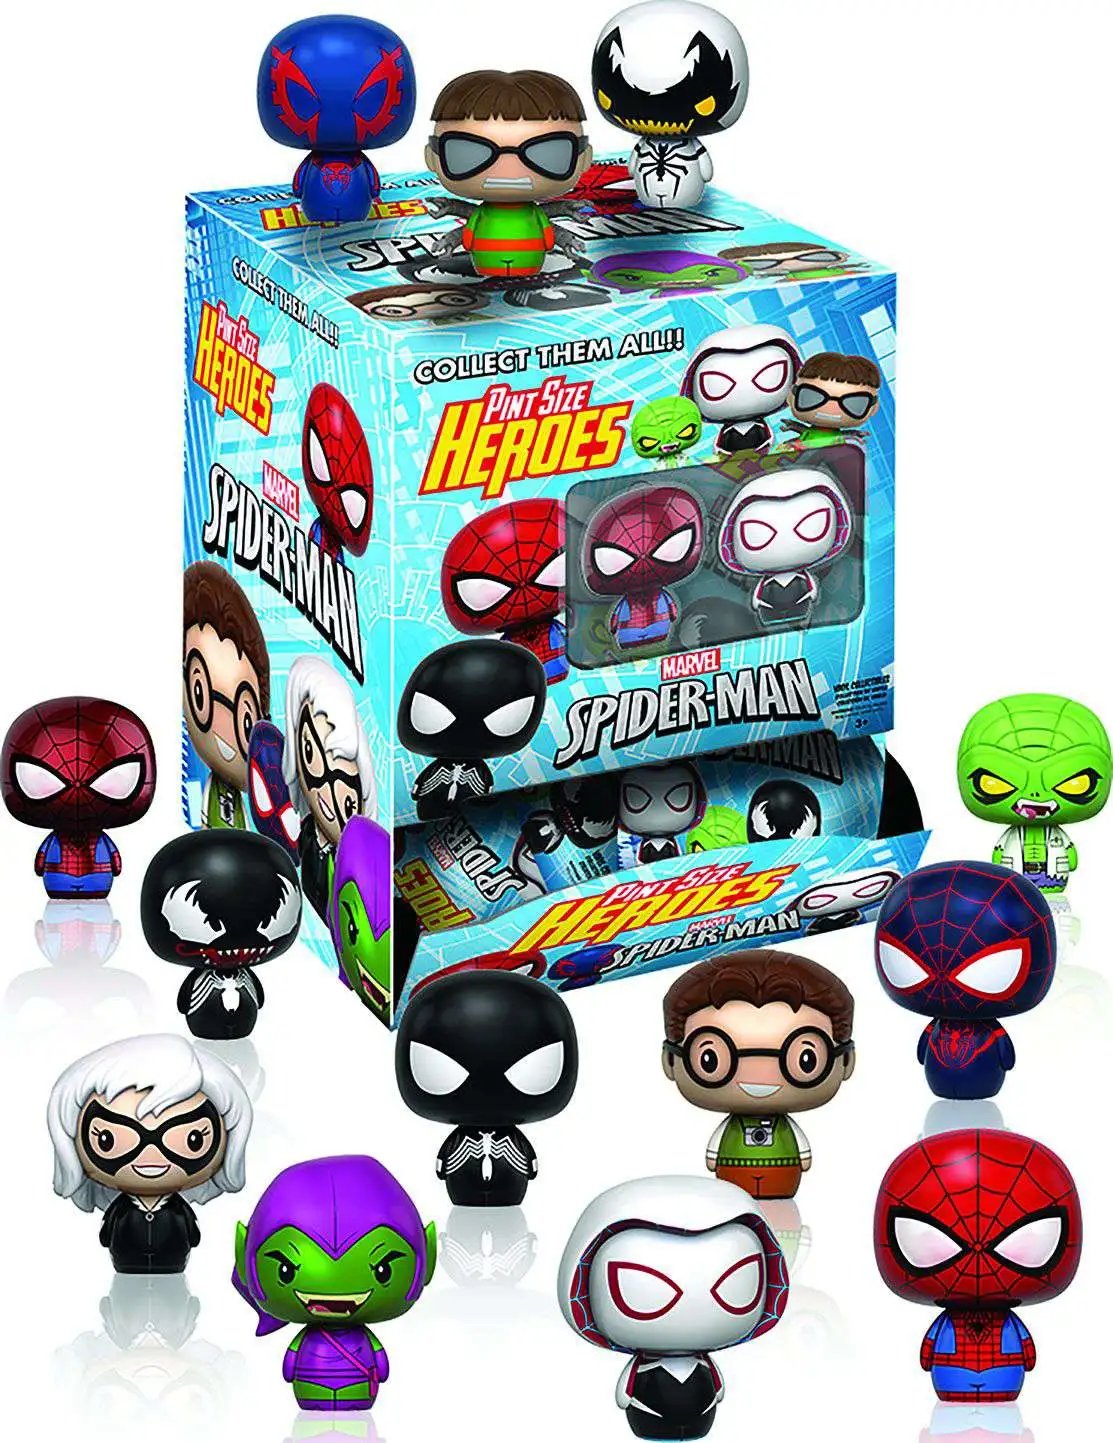 Funko Marvel Pint Size Heroes Spider-Man Mystery Box [24 Packs]